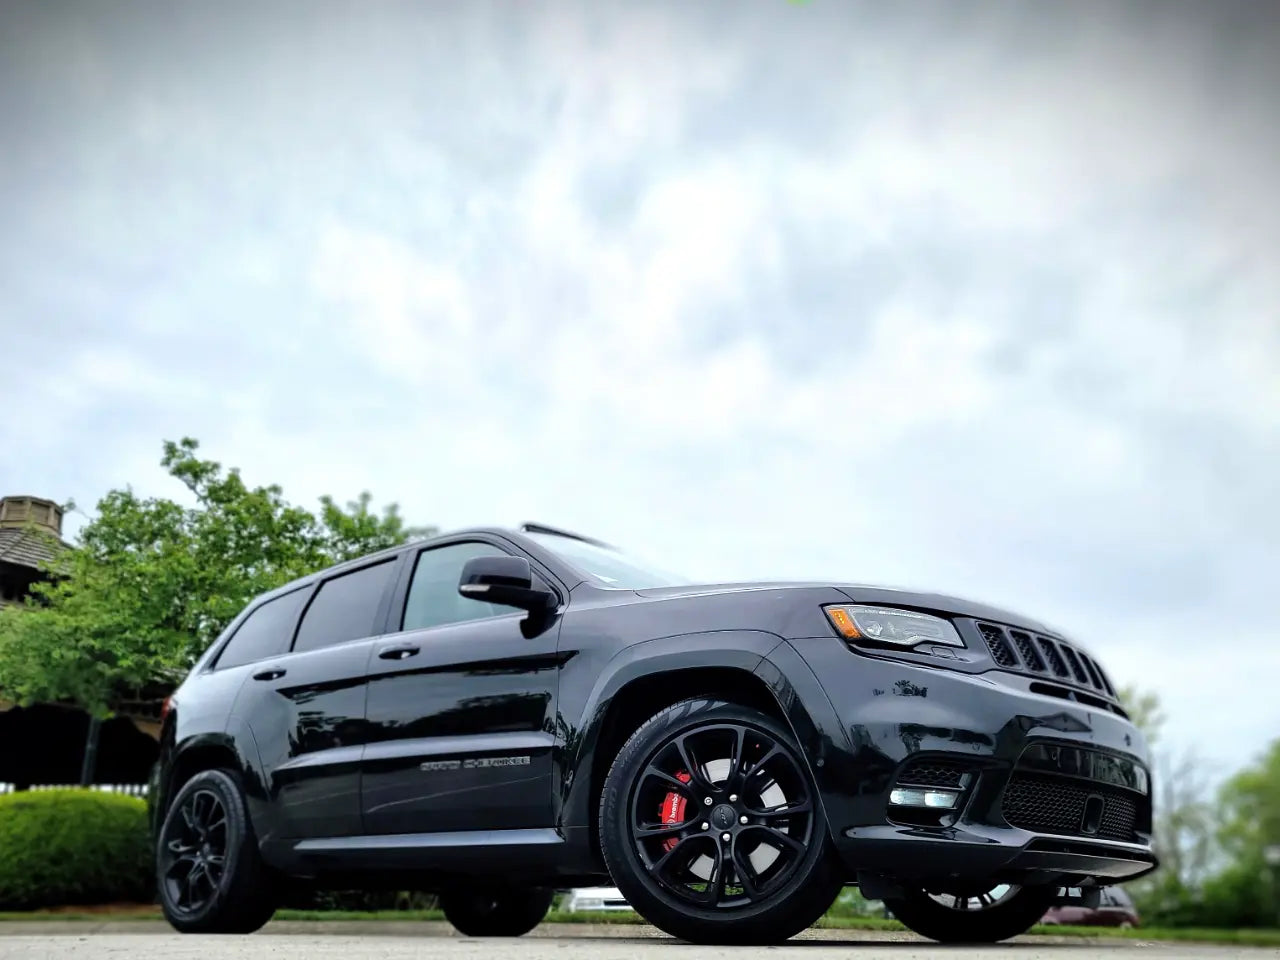 2017 Jeep Grand Cherokee SRT 4x4 $1999 DOWN AND DRIVE IN 1 HOUR!